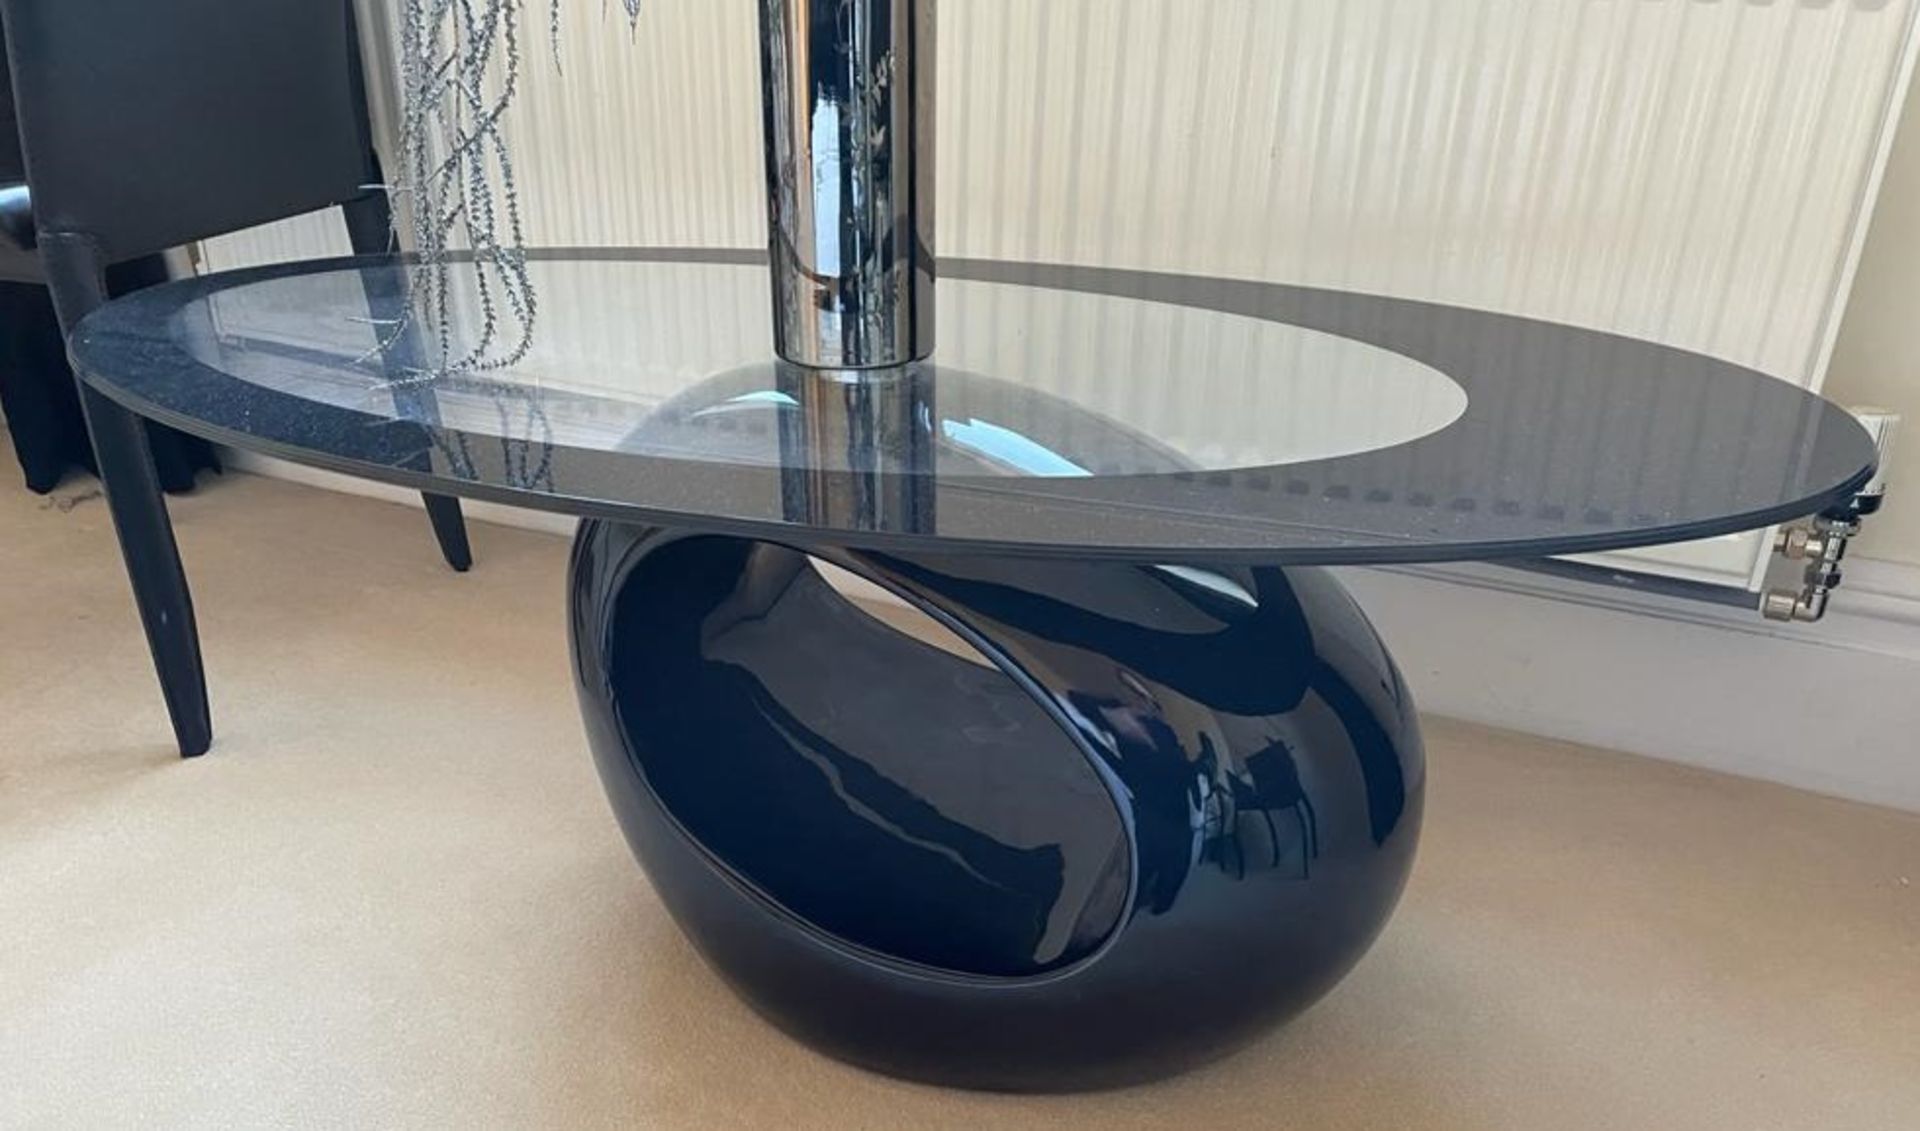 1 x Contemporary Designer Coffee Table With a High Gloss Base in Black and a Two-Tone Elliptical - Image 6 of 6